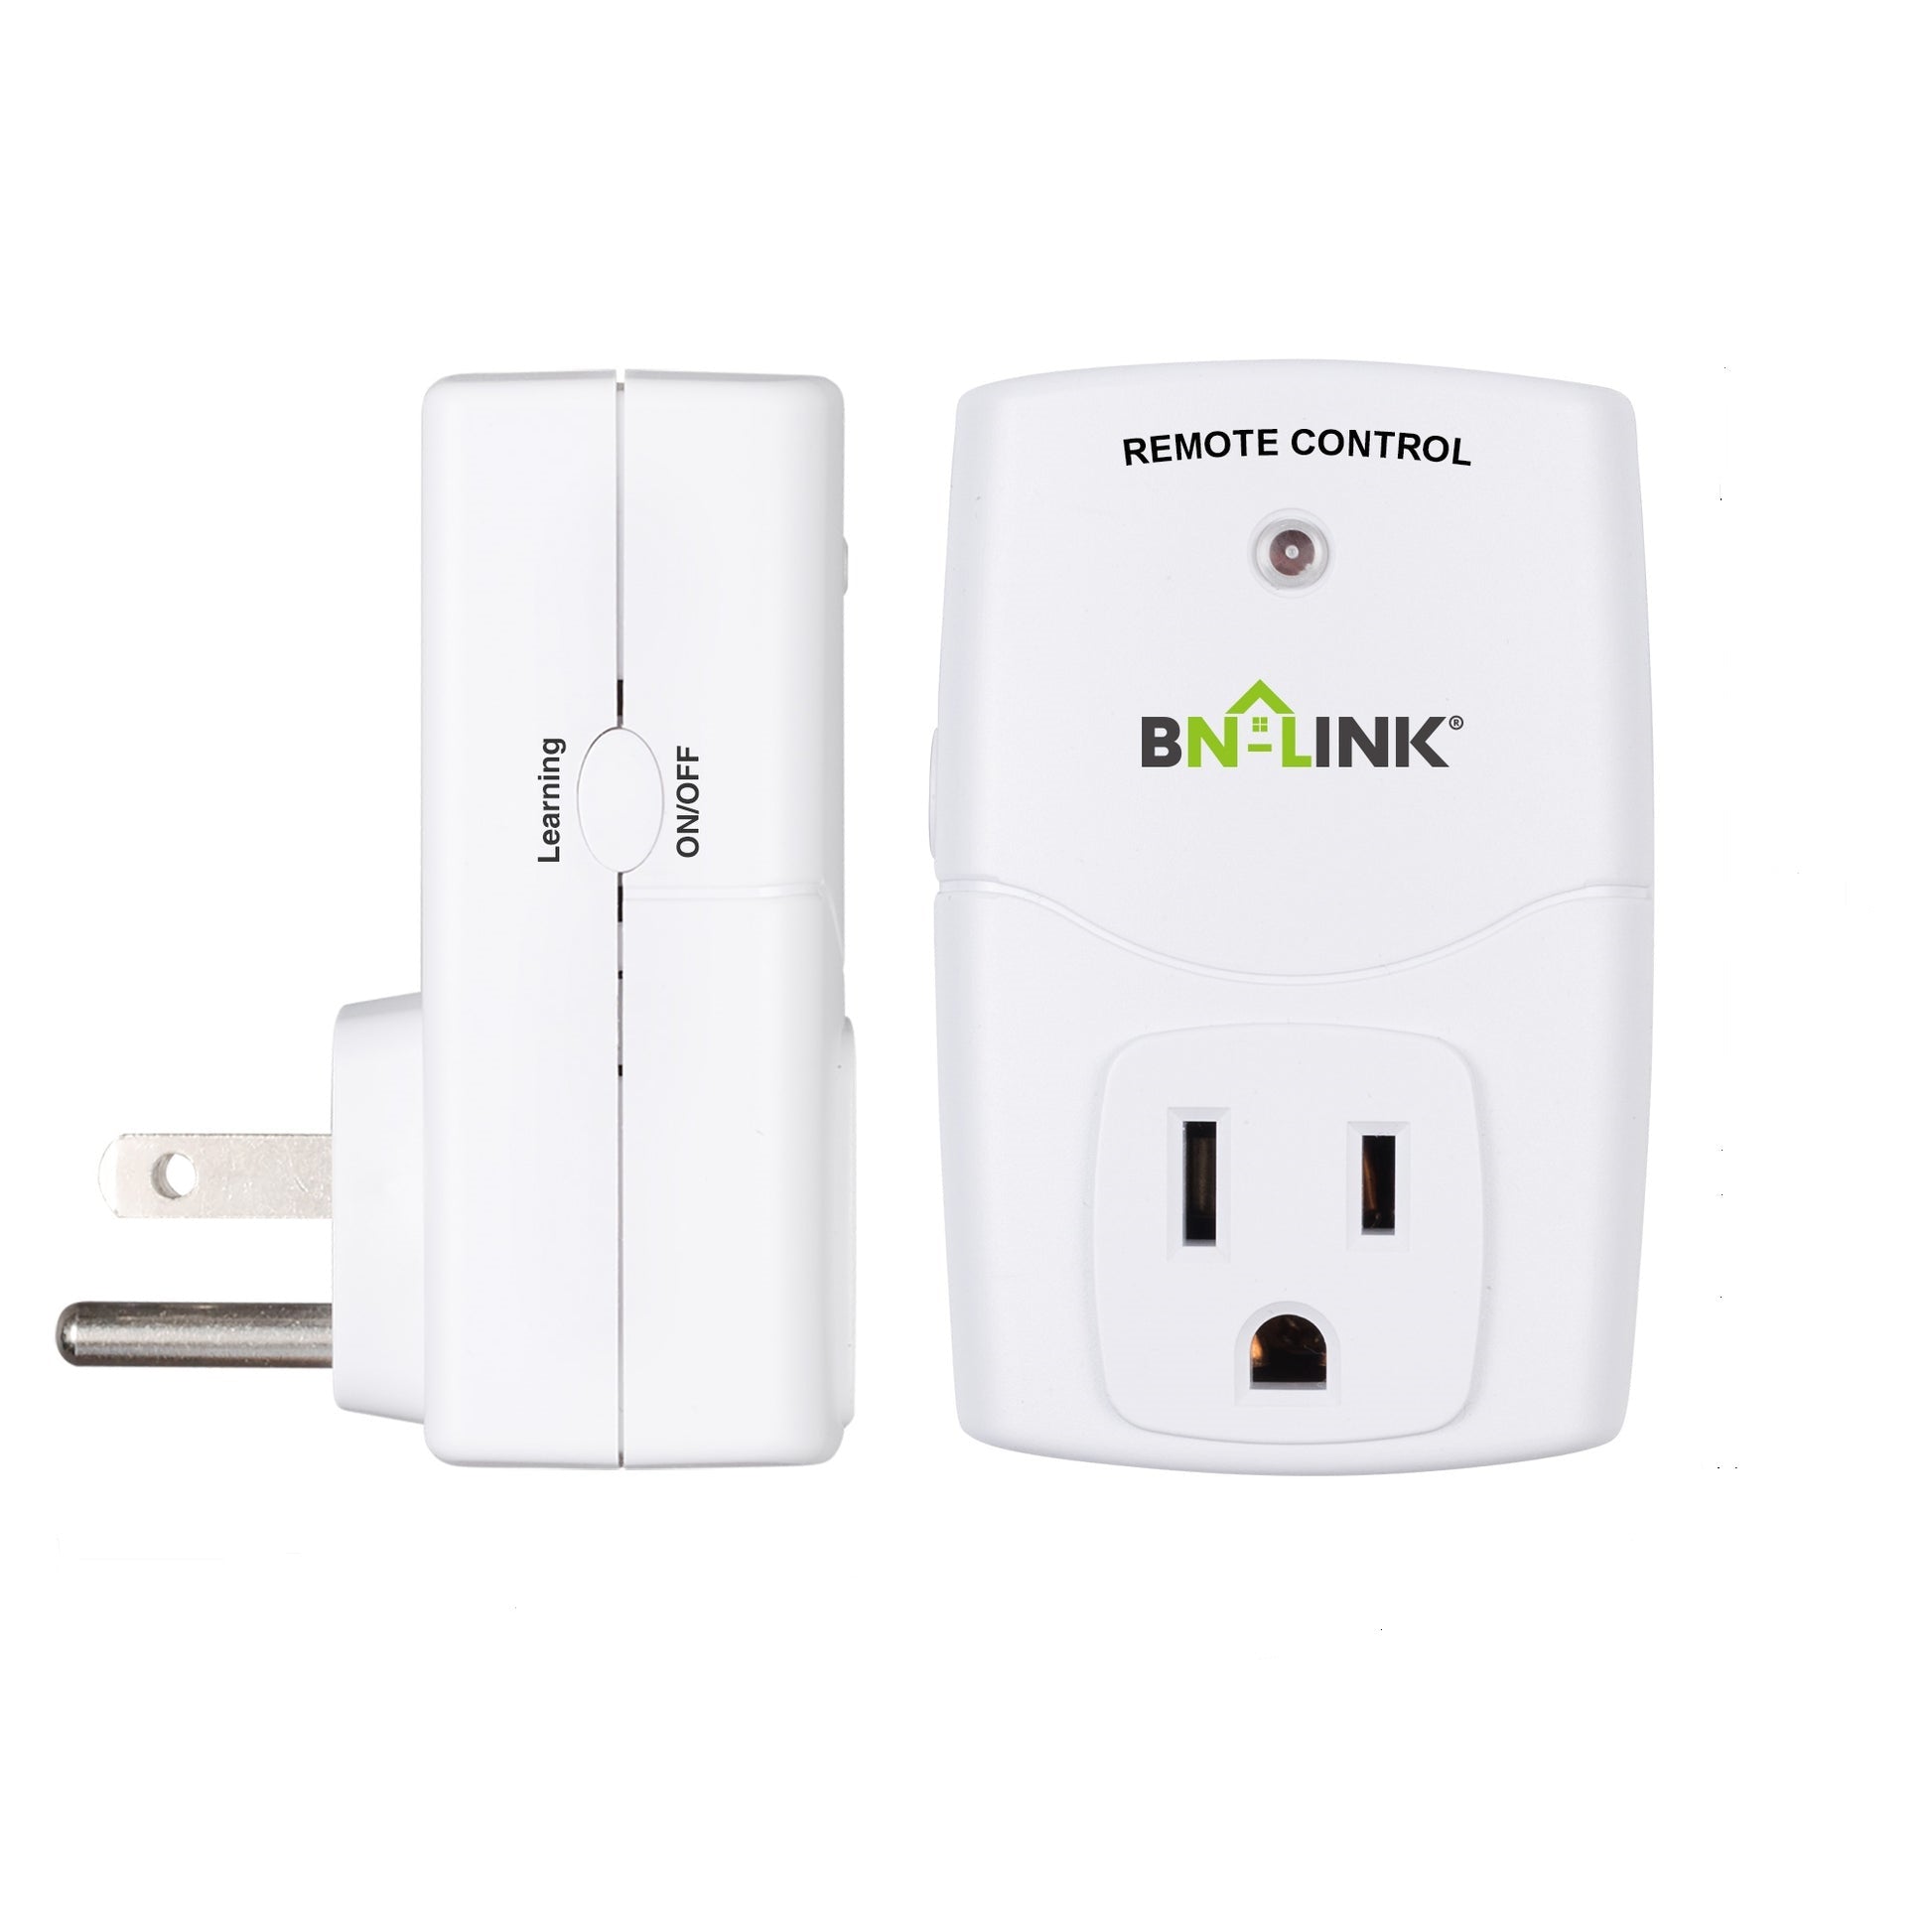 BN-LINK Wireless Remote Control Electrical Outlet Switch for Lights, Fans, Christmas Lights, Small Appliance, Long Range White Learning Code, 3Rx-1Tx